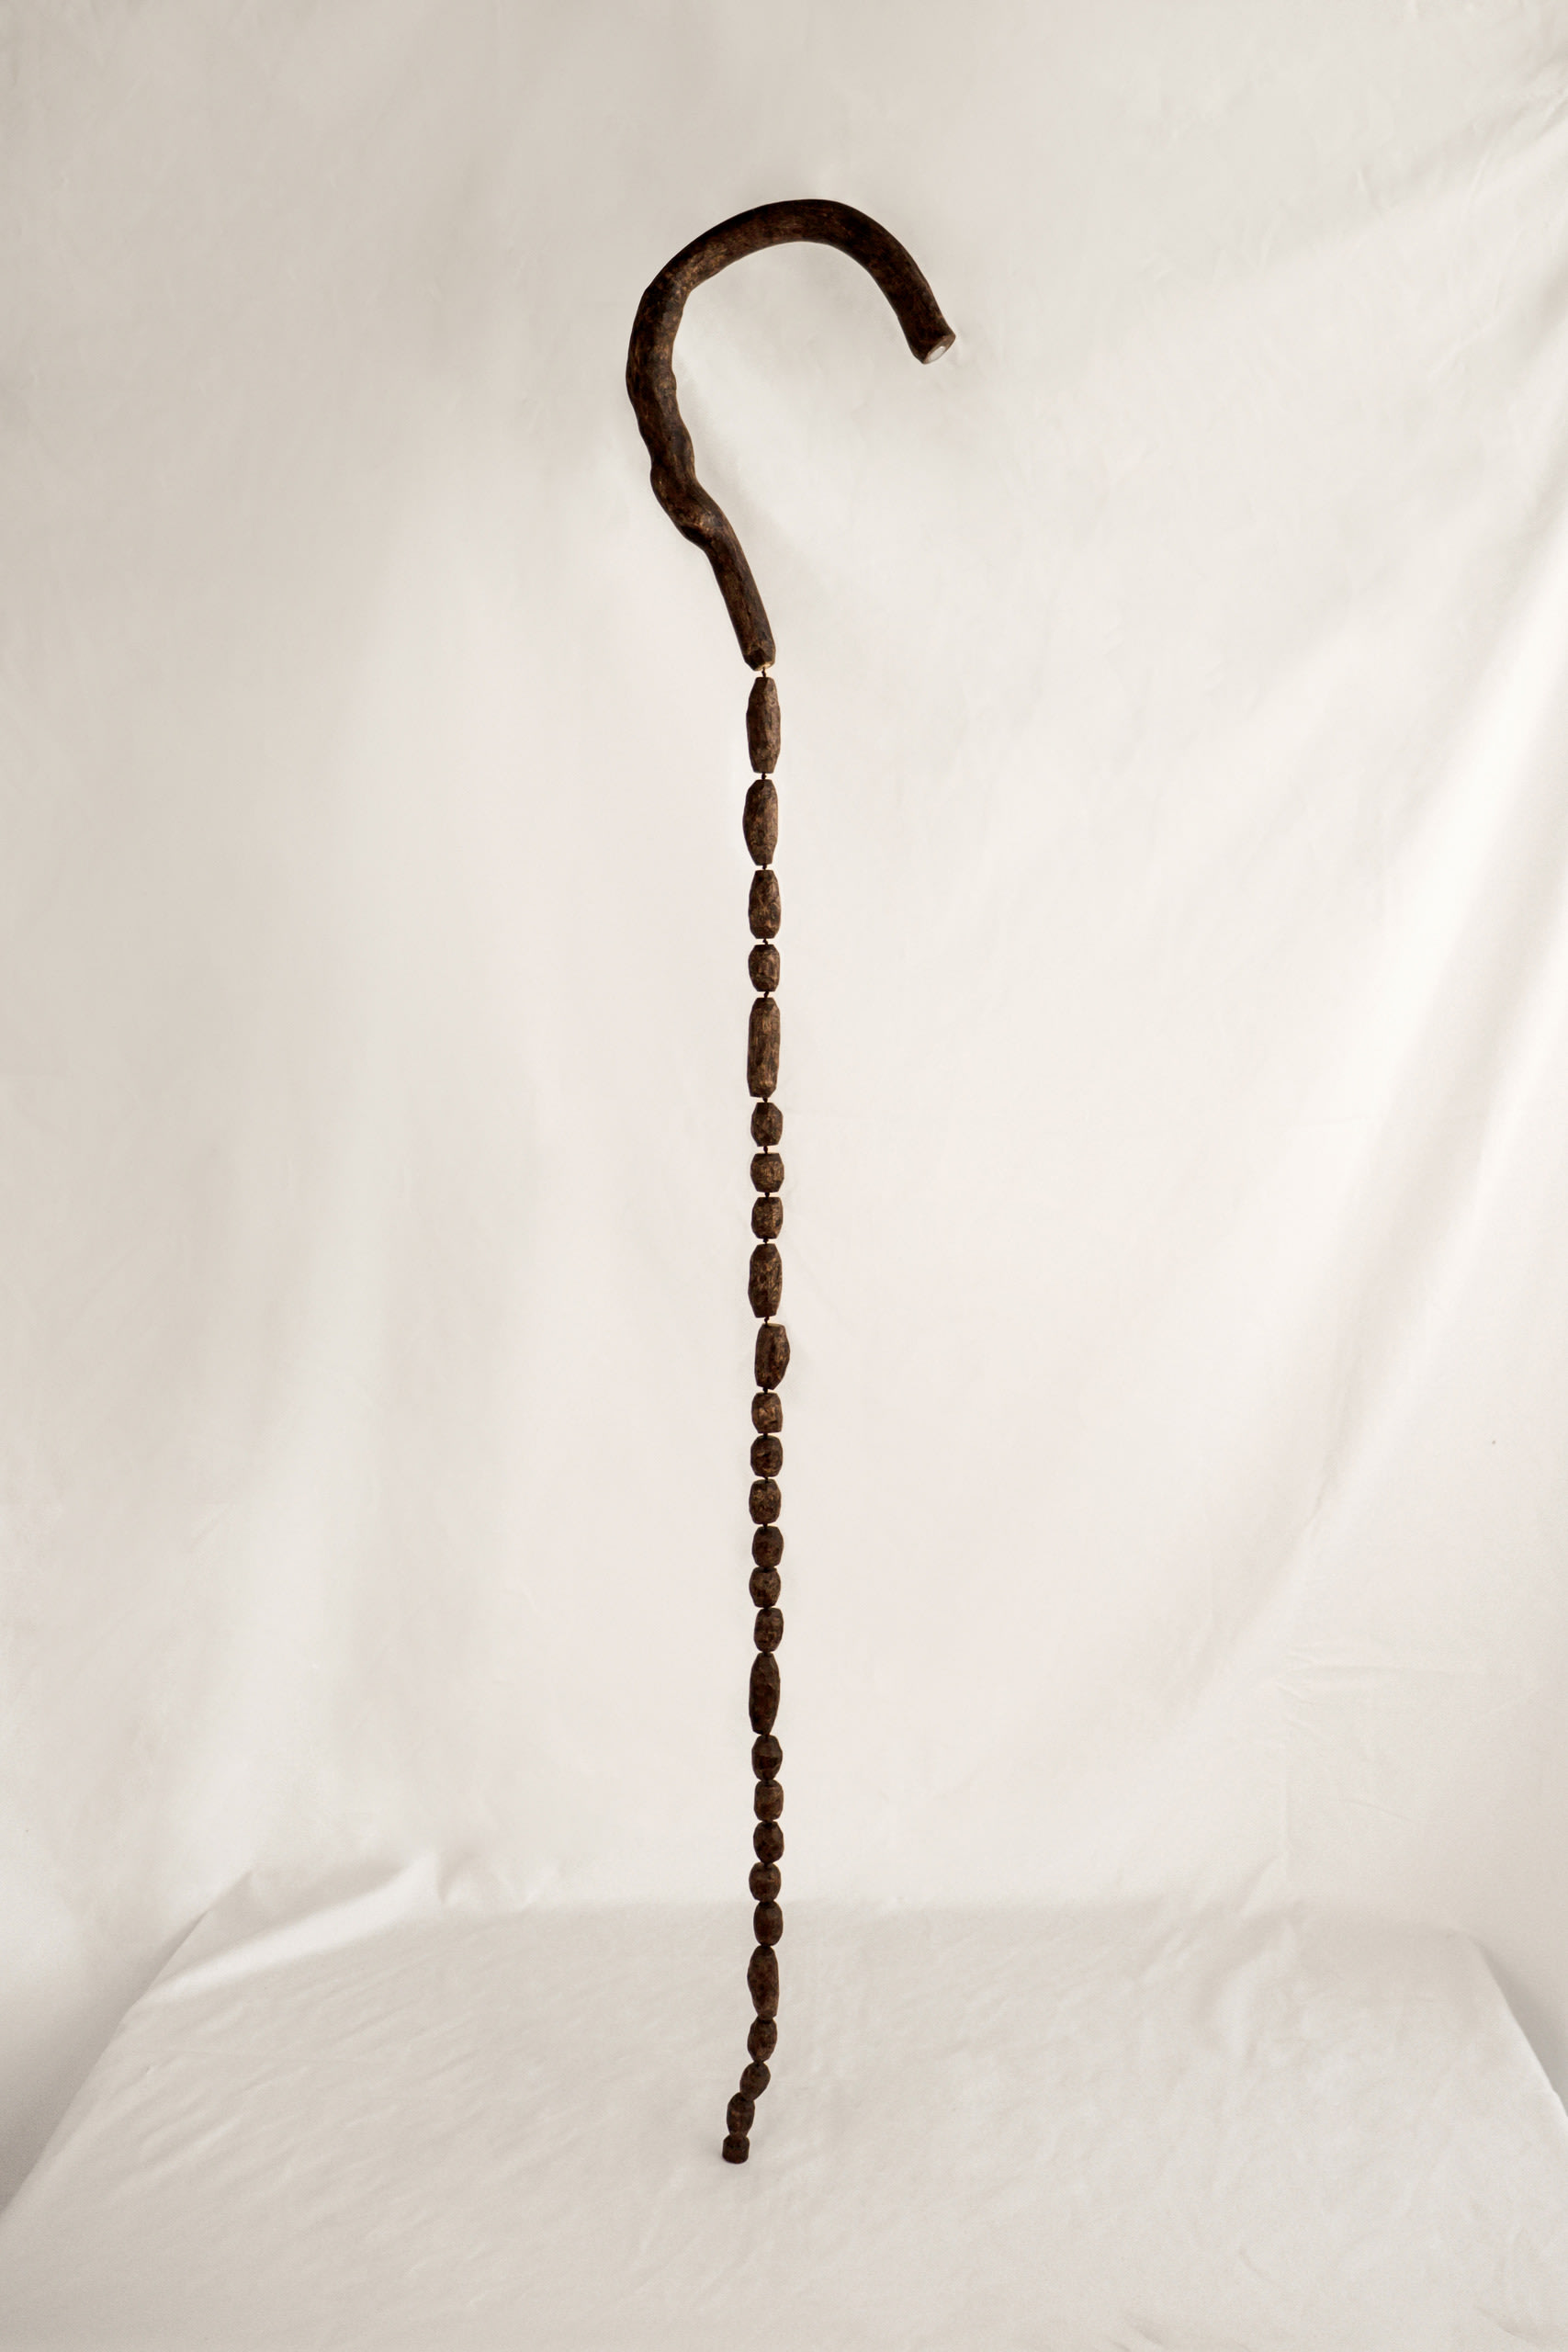 a walking stick being cut and carved into little wooden beads and stringed back together.